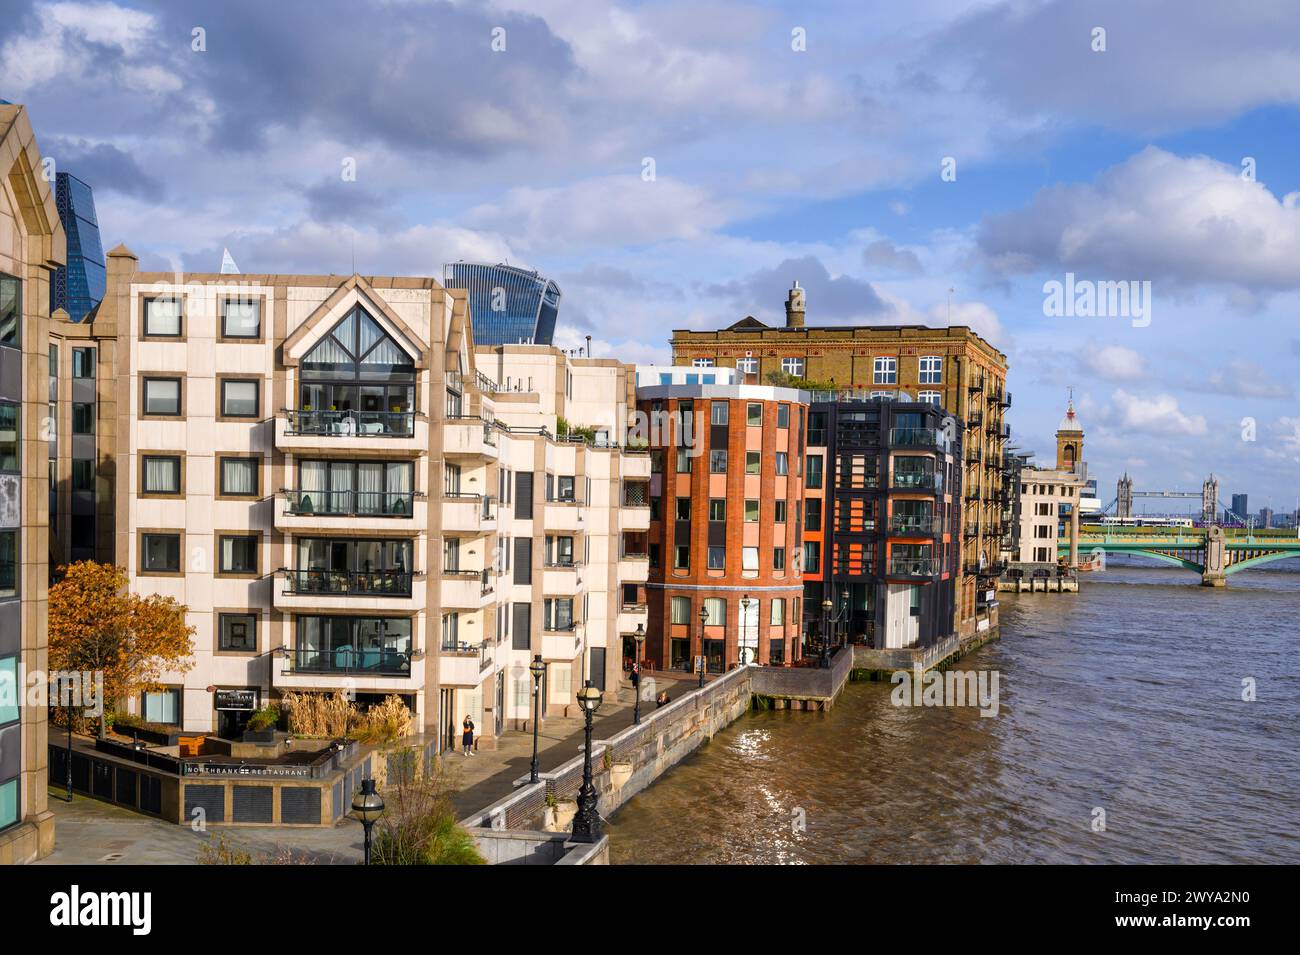 Riverside apartments next to the River Thames, London, England. Stock Photo